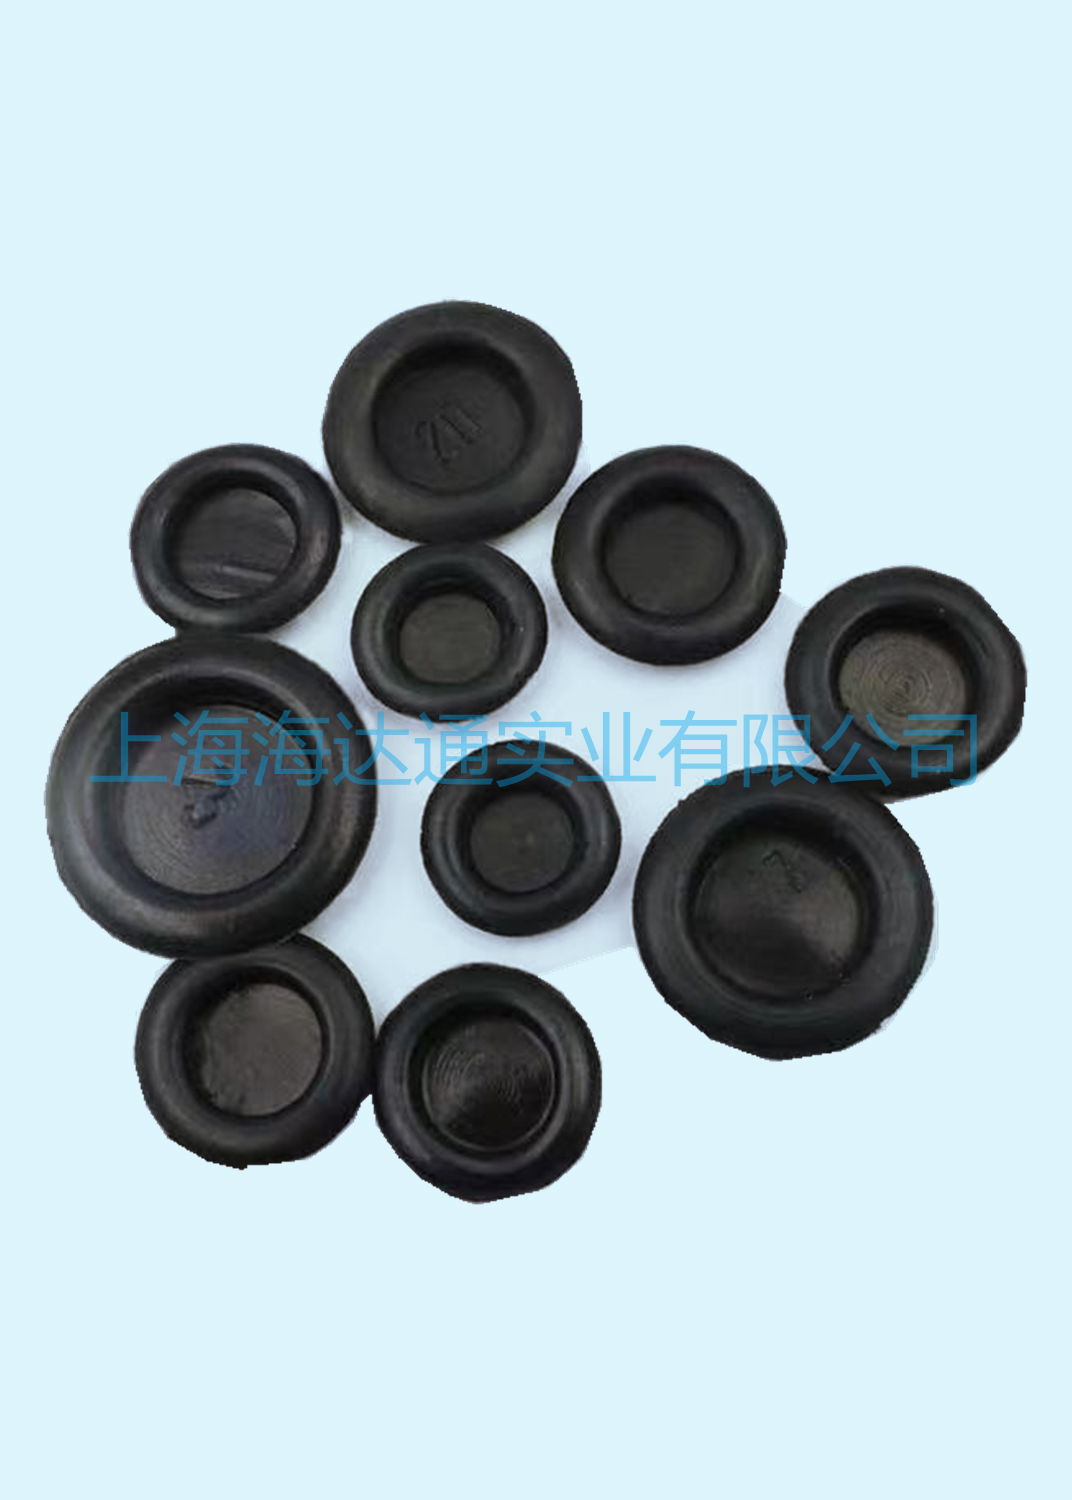 Environmental protection rubber single side dustproof coil sealing ring plug pro 2